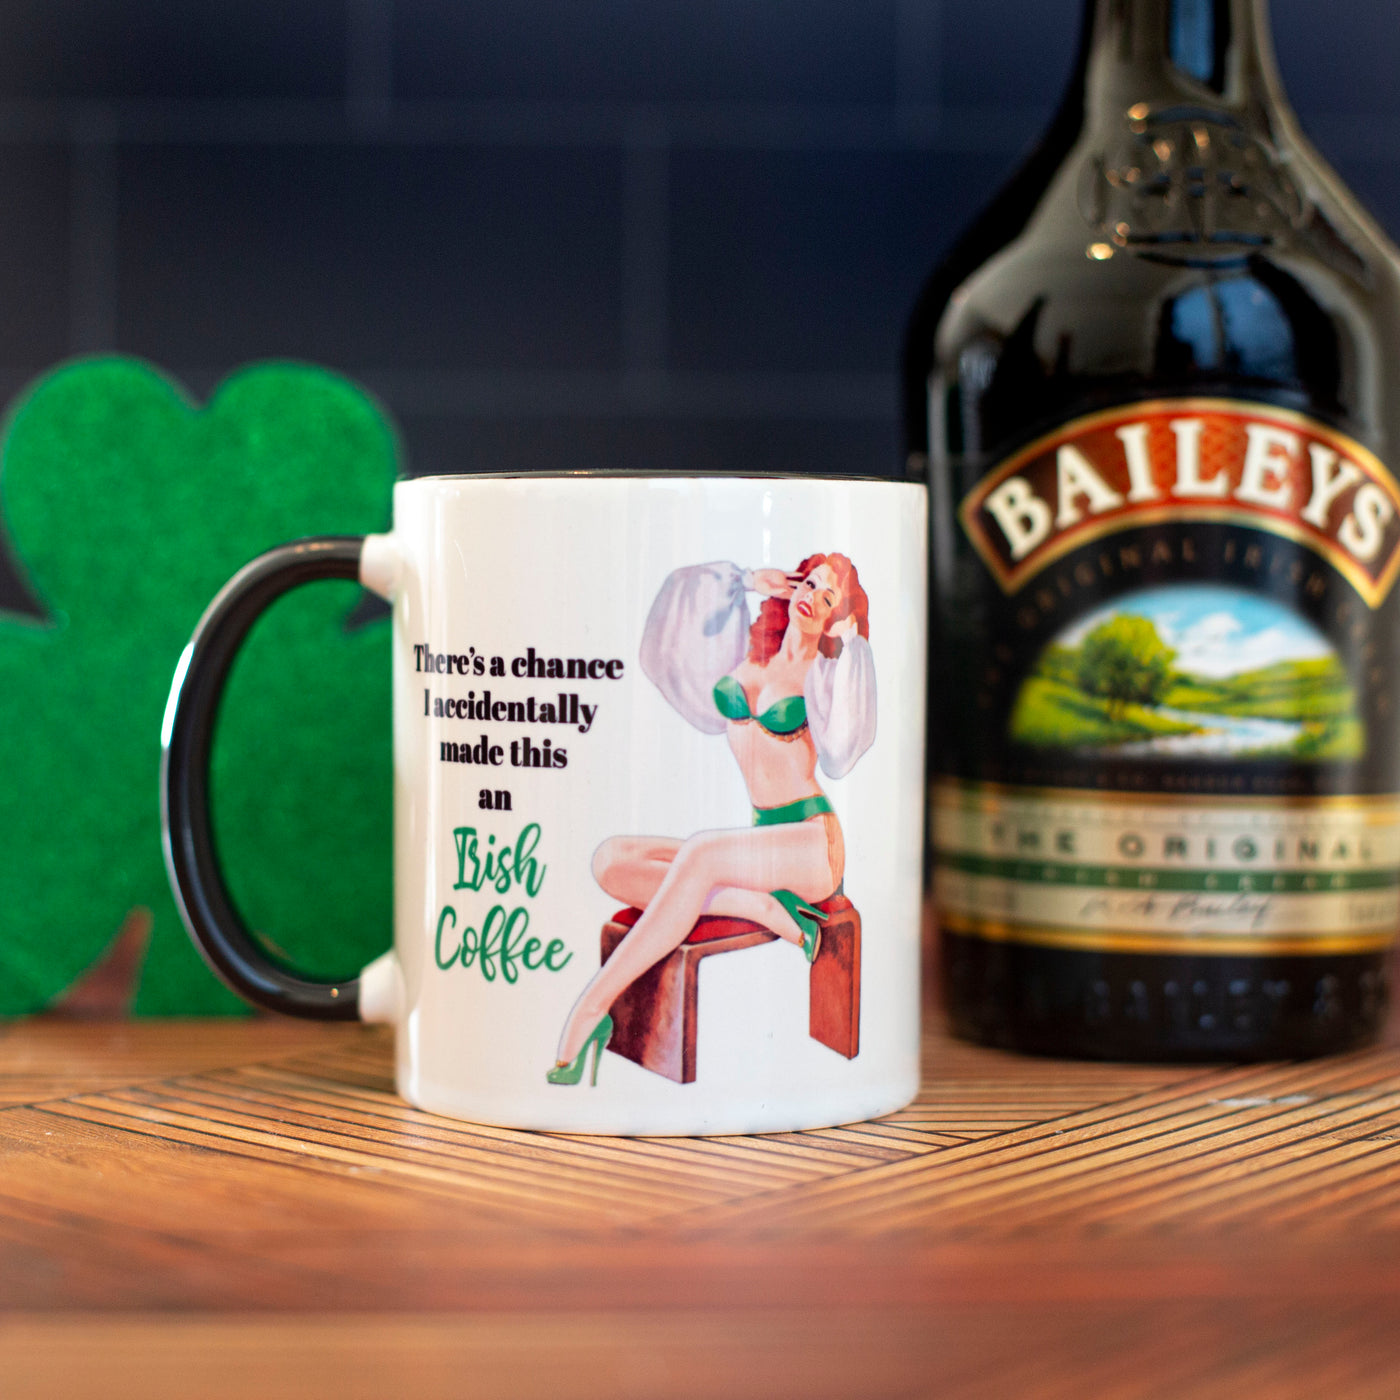 vintage pinup "theres a chance this is irish coffee" funny two tone coffee mug great for st patricks day, co-worker gift, girl gift or spring birthday presents